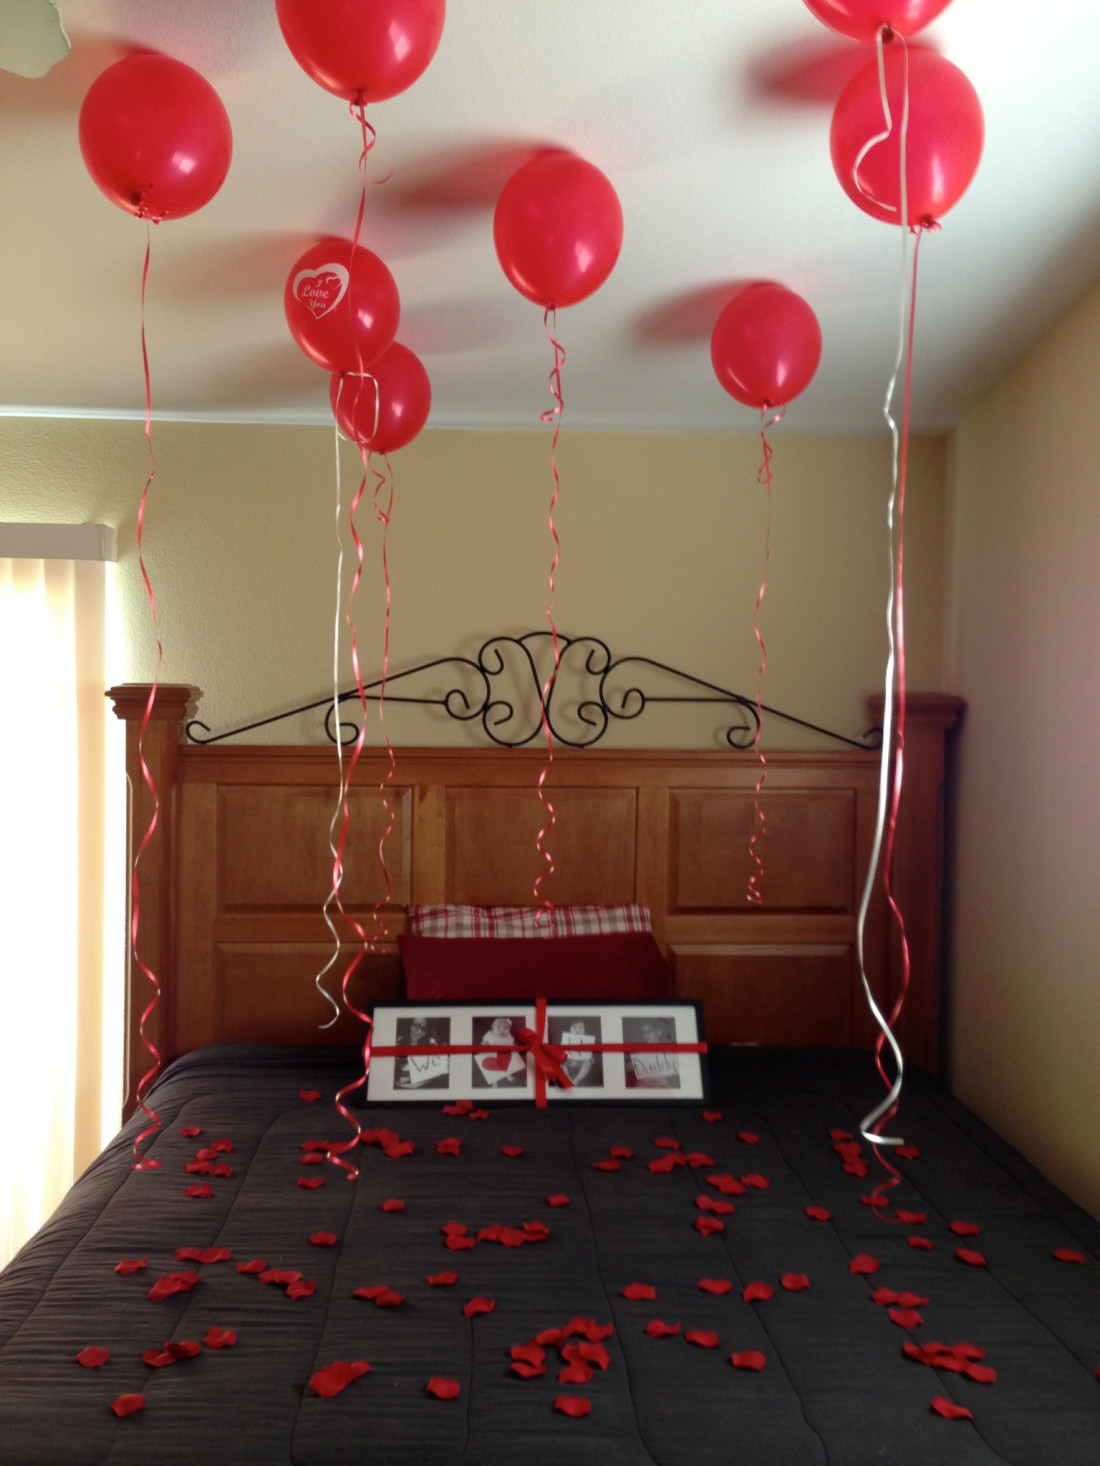 Valentine Gift Ideas For My Wife
 10 Creative Ways to Surprise Your Hubby for Valentine s